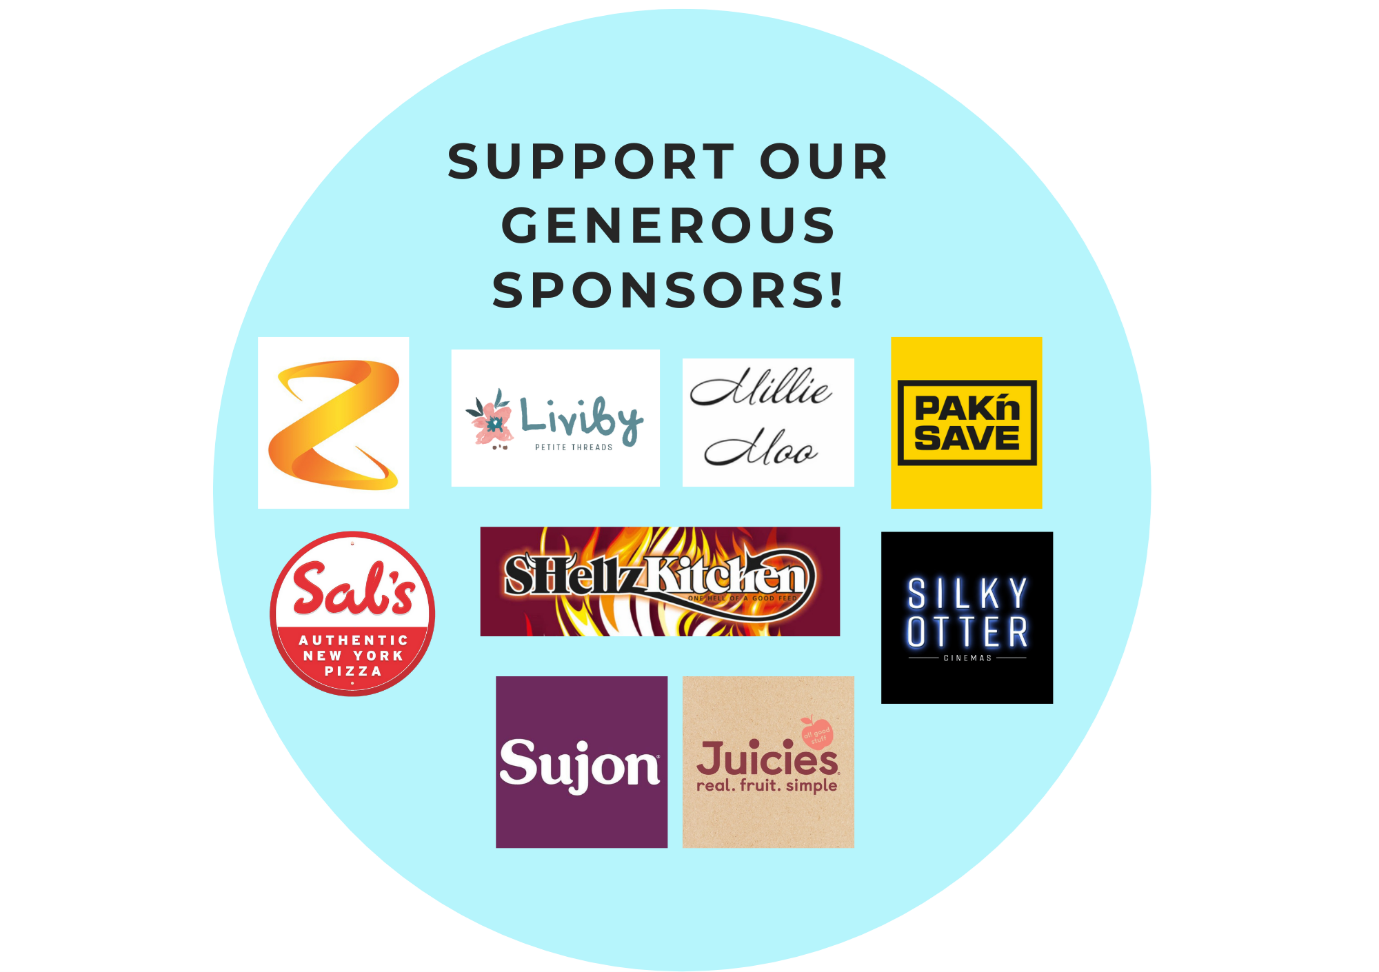 Support our generous sponsors